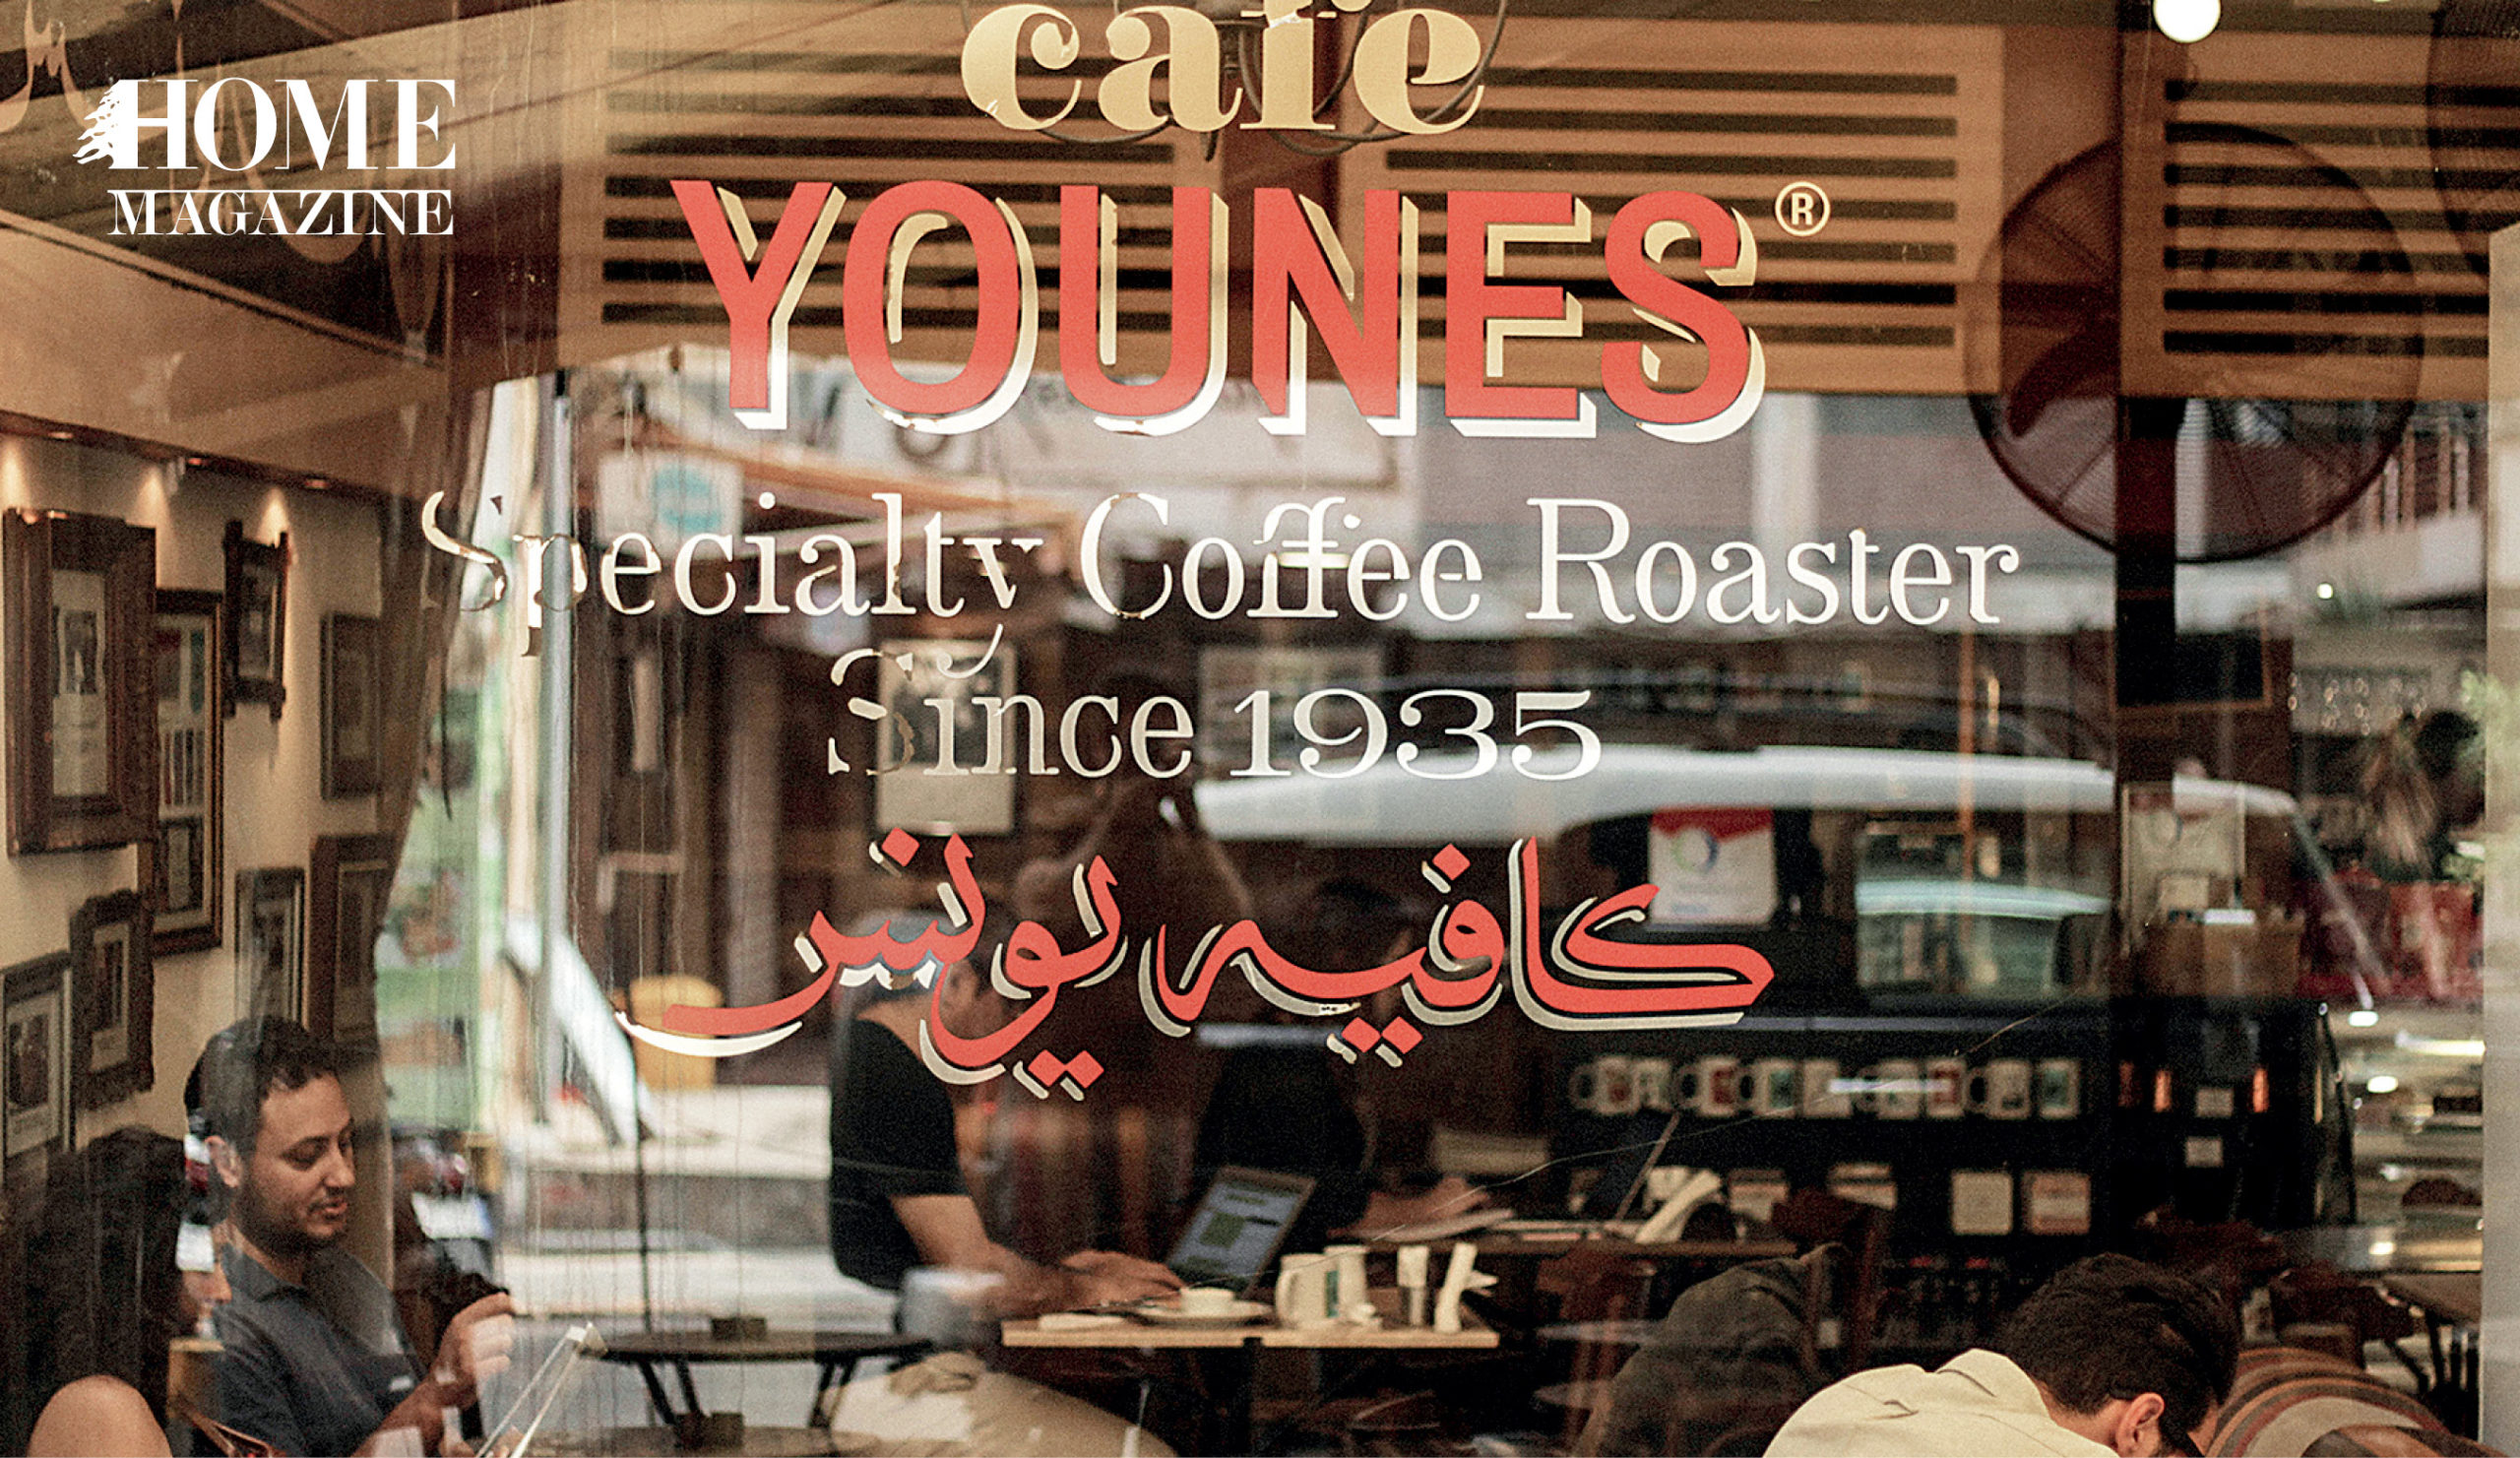 Cafe Younes Specialty Coffee Roaster signage on a glass window